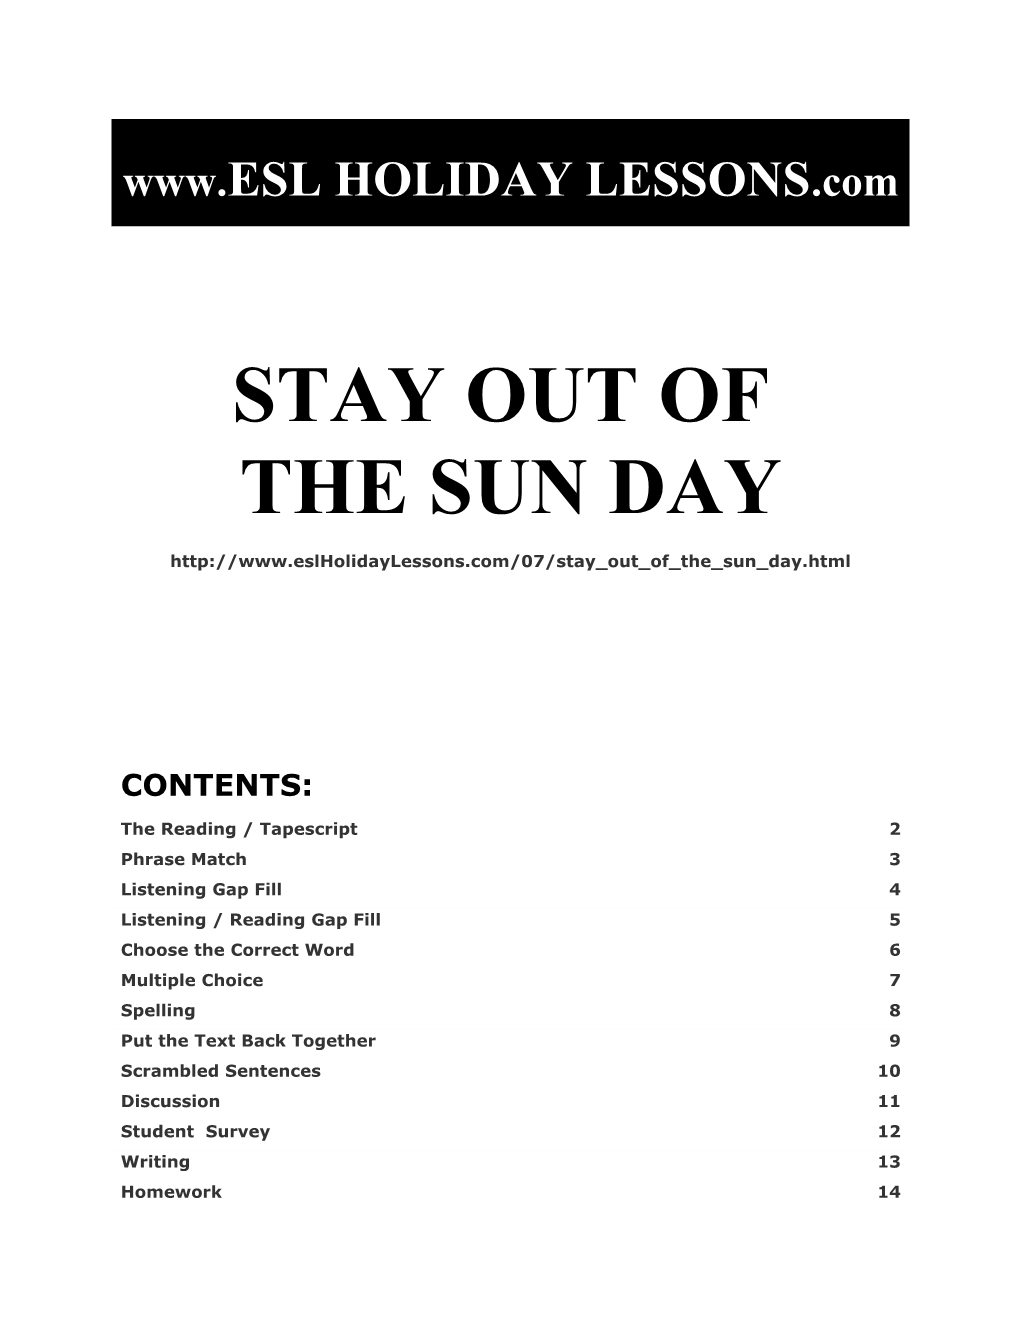 Holiday Lessons - Stay out of the Sun Day